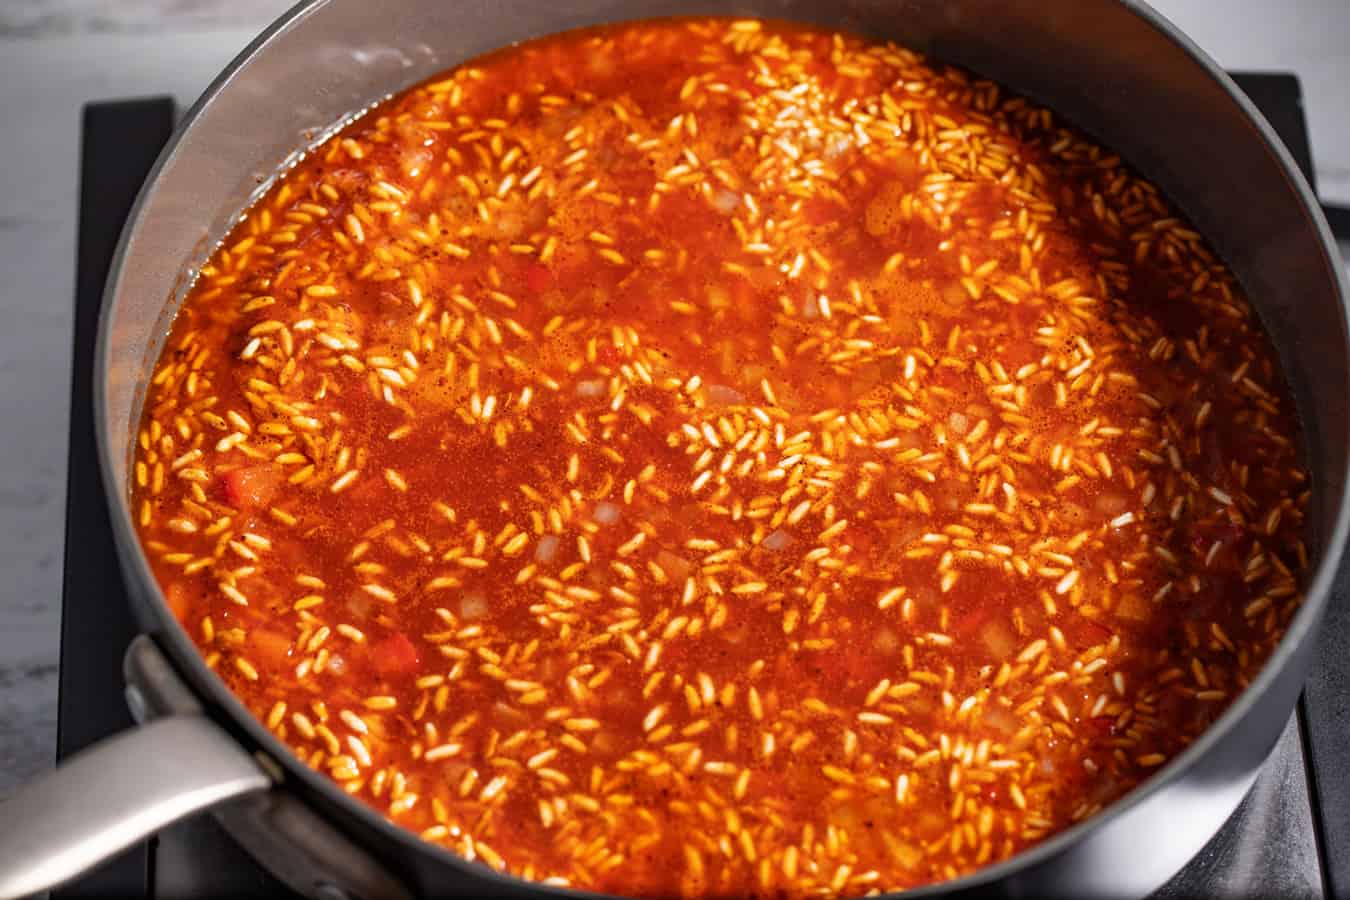 toasted rice covered in liquid, ready to be cooked